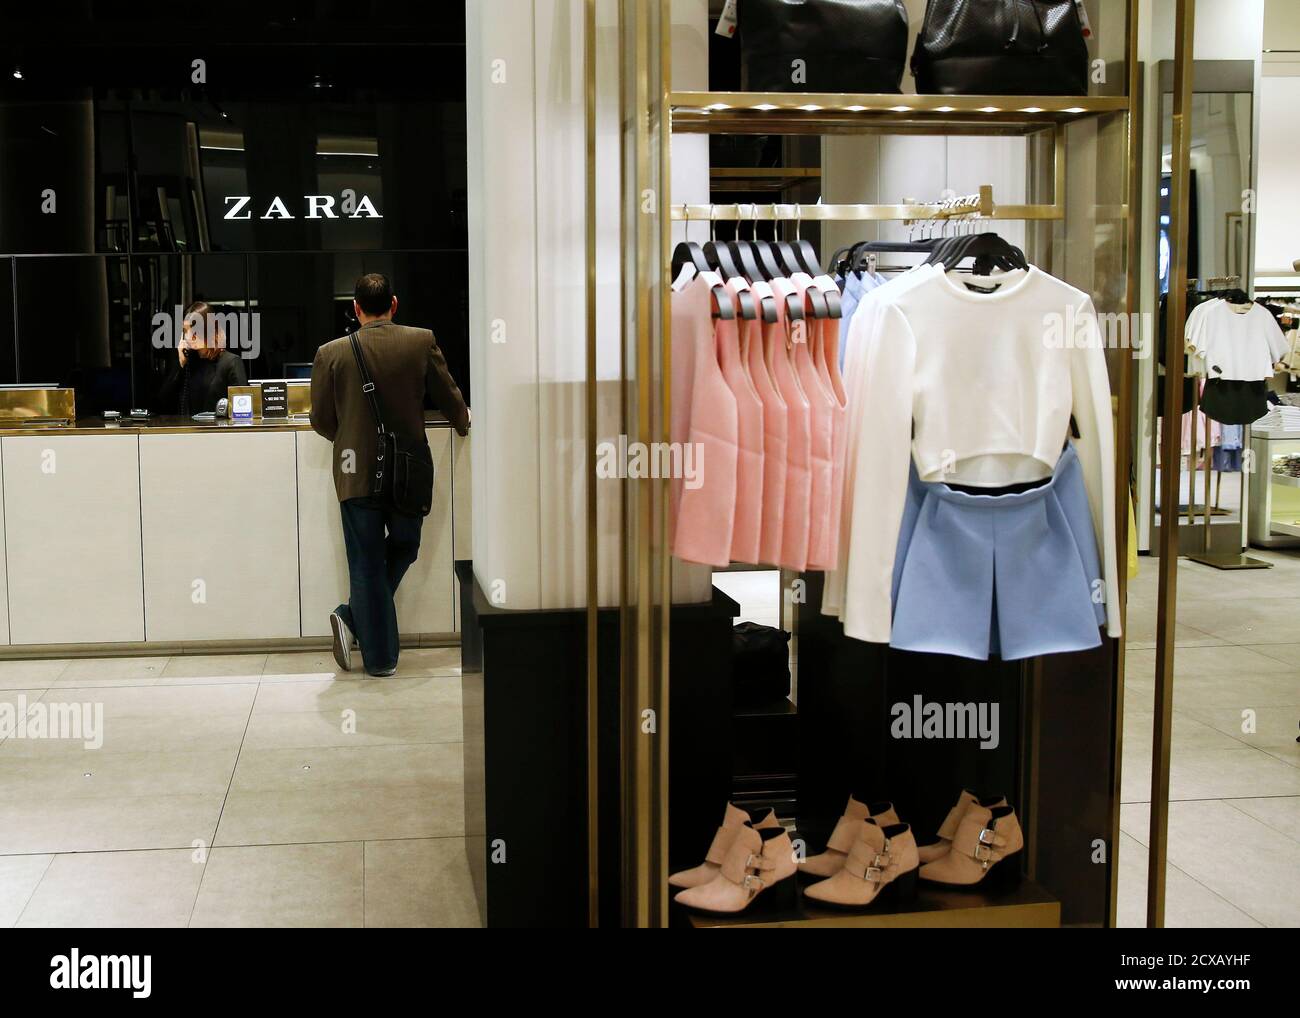 A man pays at a Zara store in central Madrid March 18, 2014. Inditex, the  world's biggest fashion retailer, will accelerate investment in 2014 to  open more new stores after results last